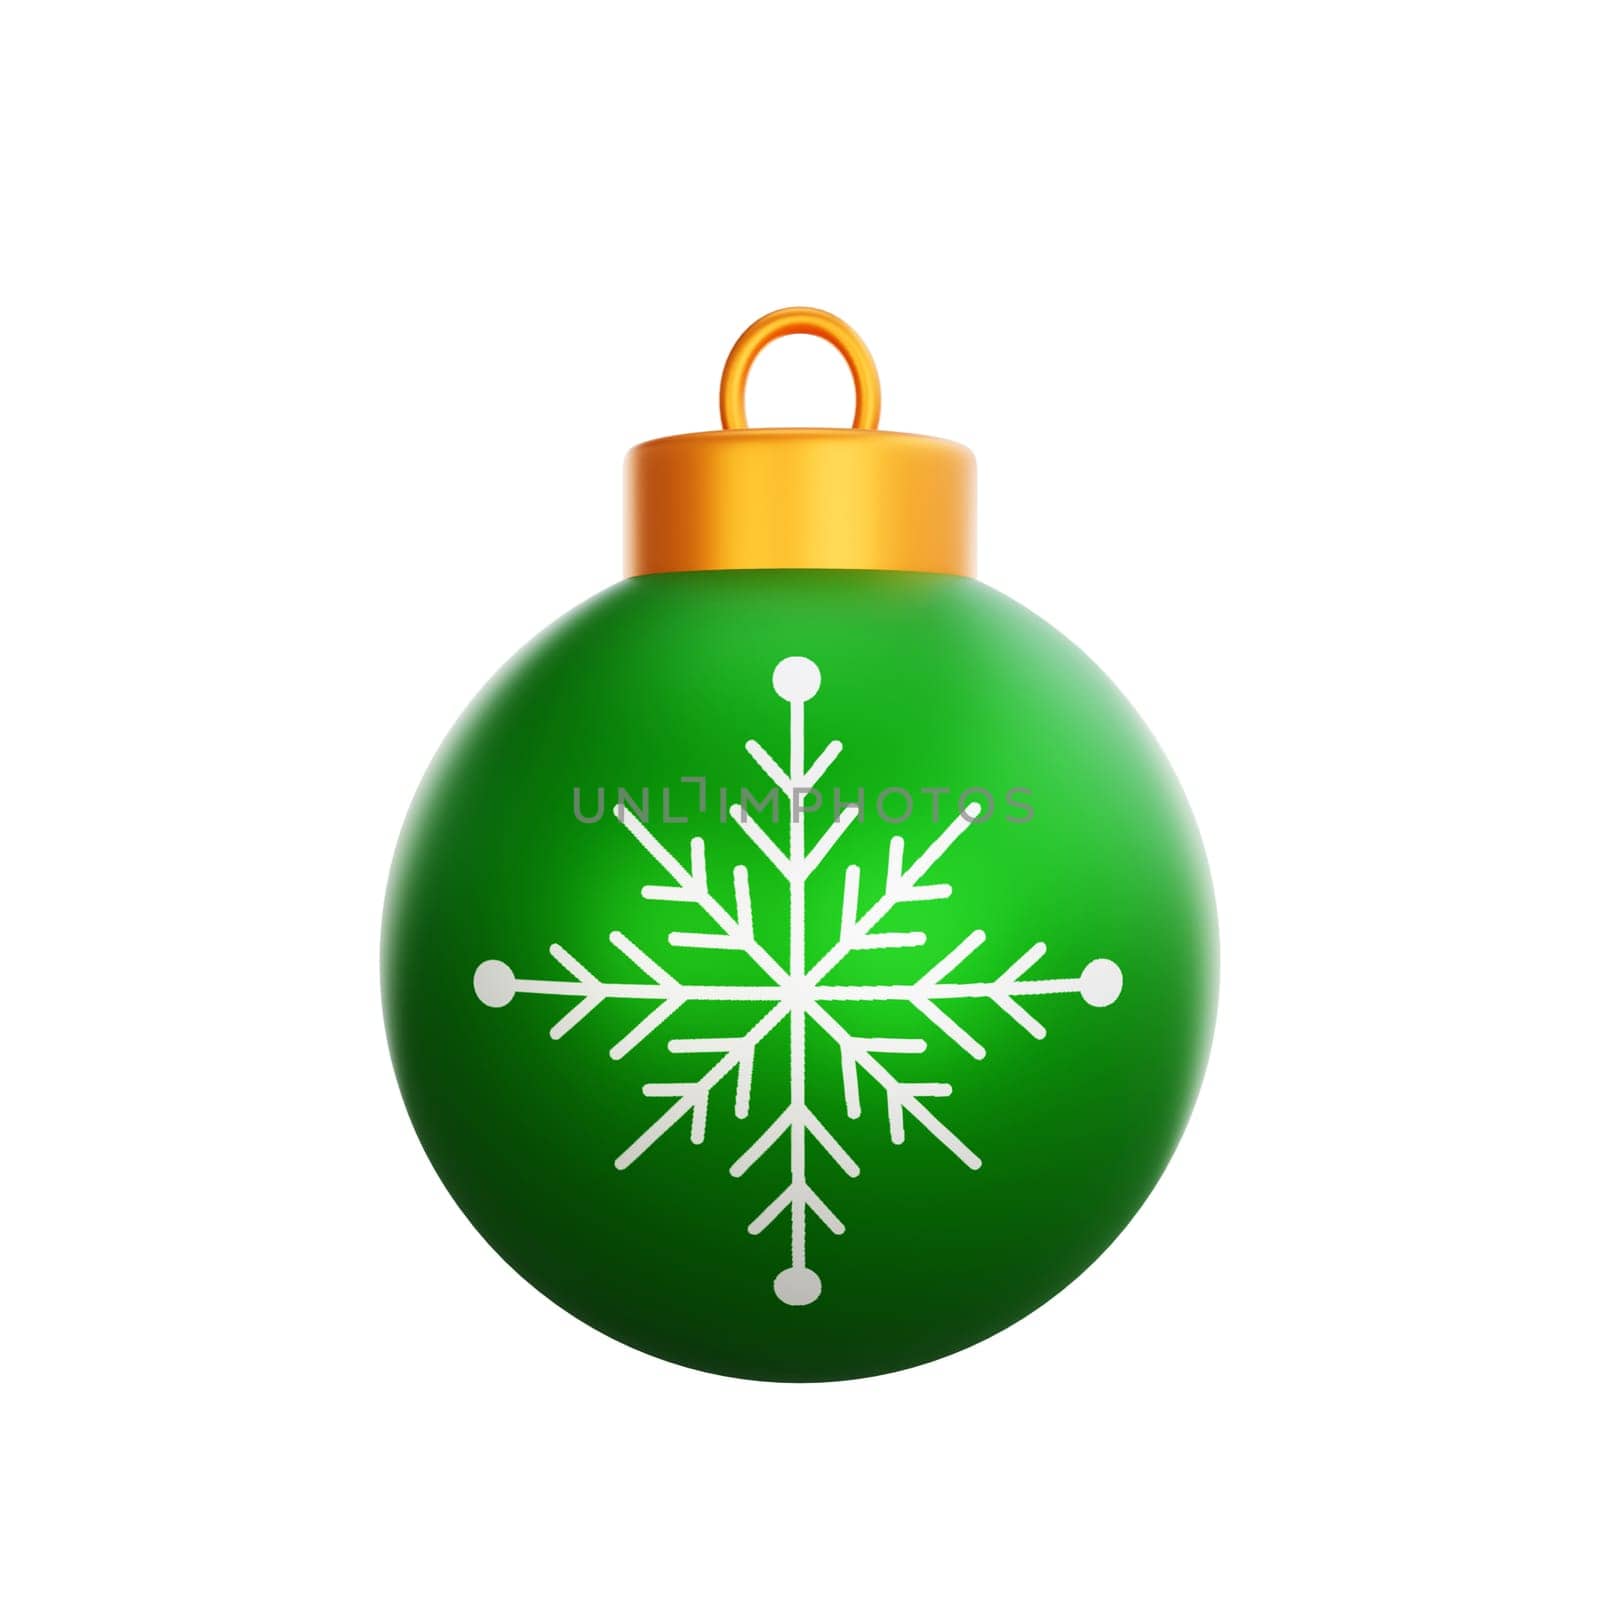 3D illustration of a Christmas ball icon. Perfect for Christmas and happy new year celebrations